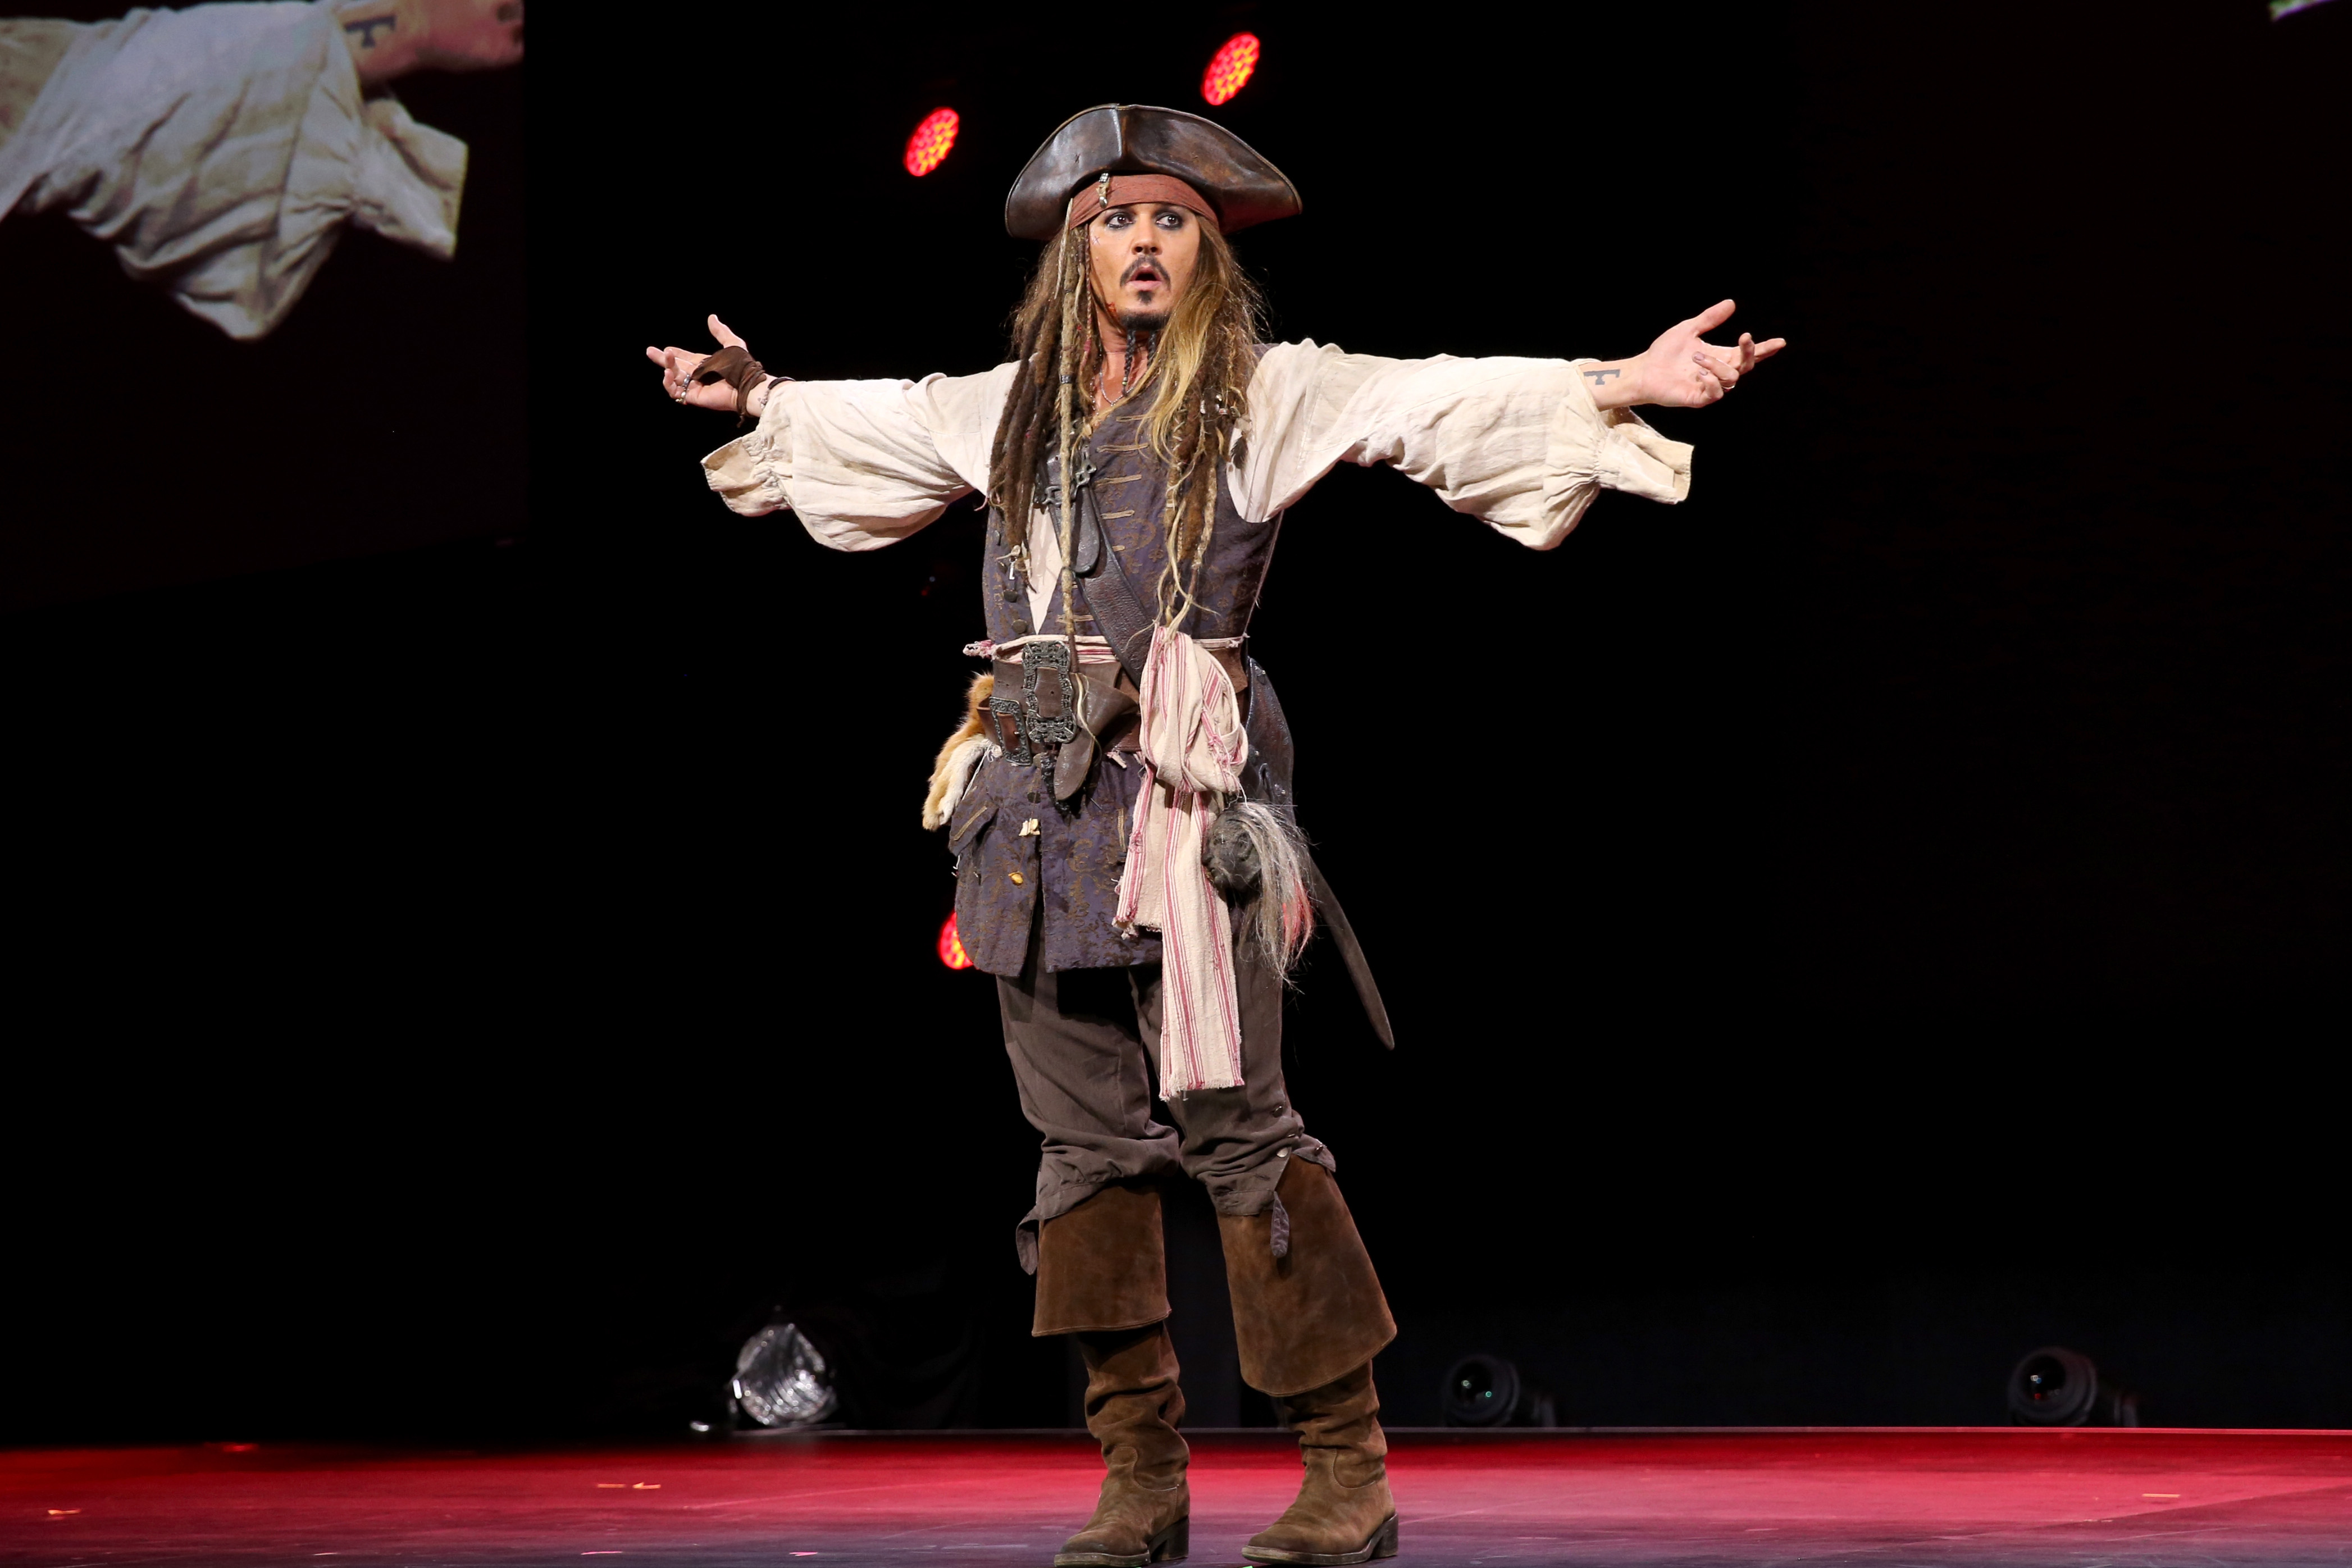 Johnny Depp is dressed as Jack Sparrow at a presentation for Pirates of the Caribbean: Dead Men Tell No Tales at D23 EXPO 2015